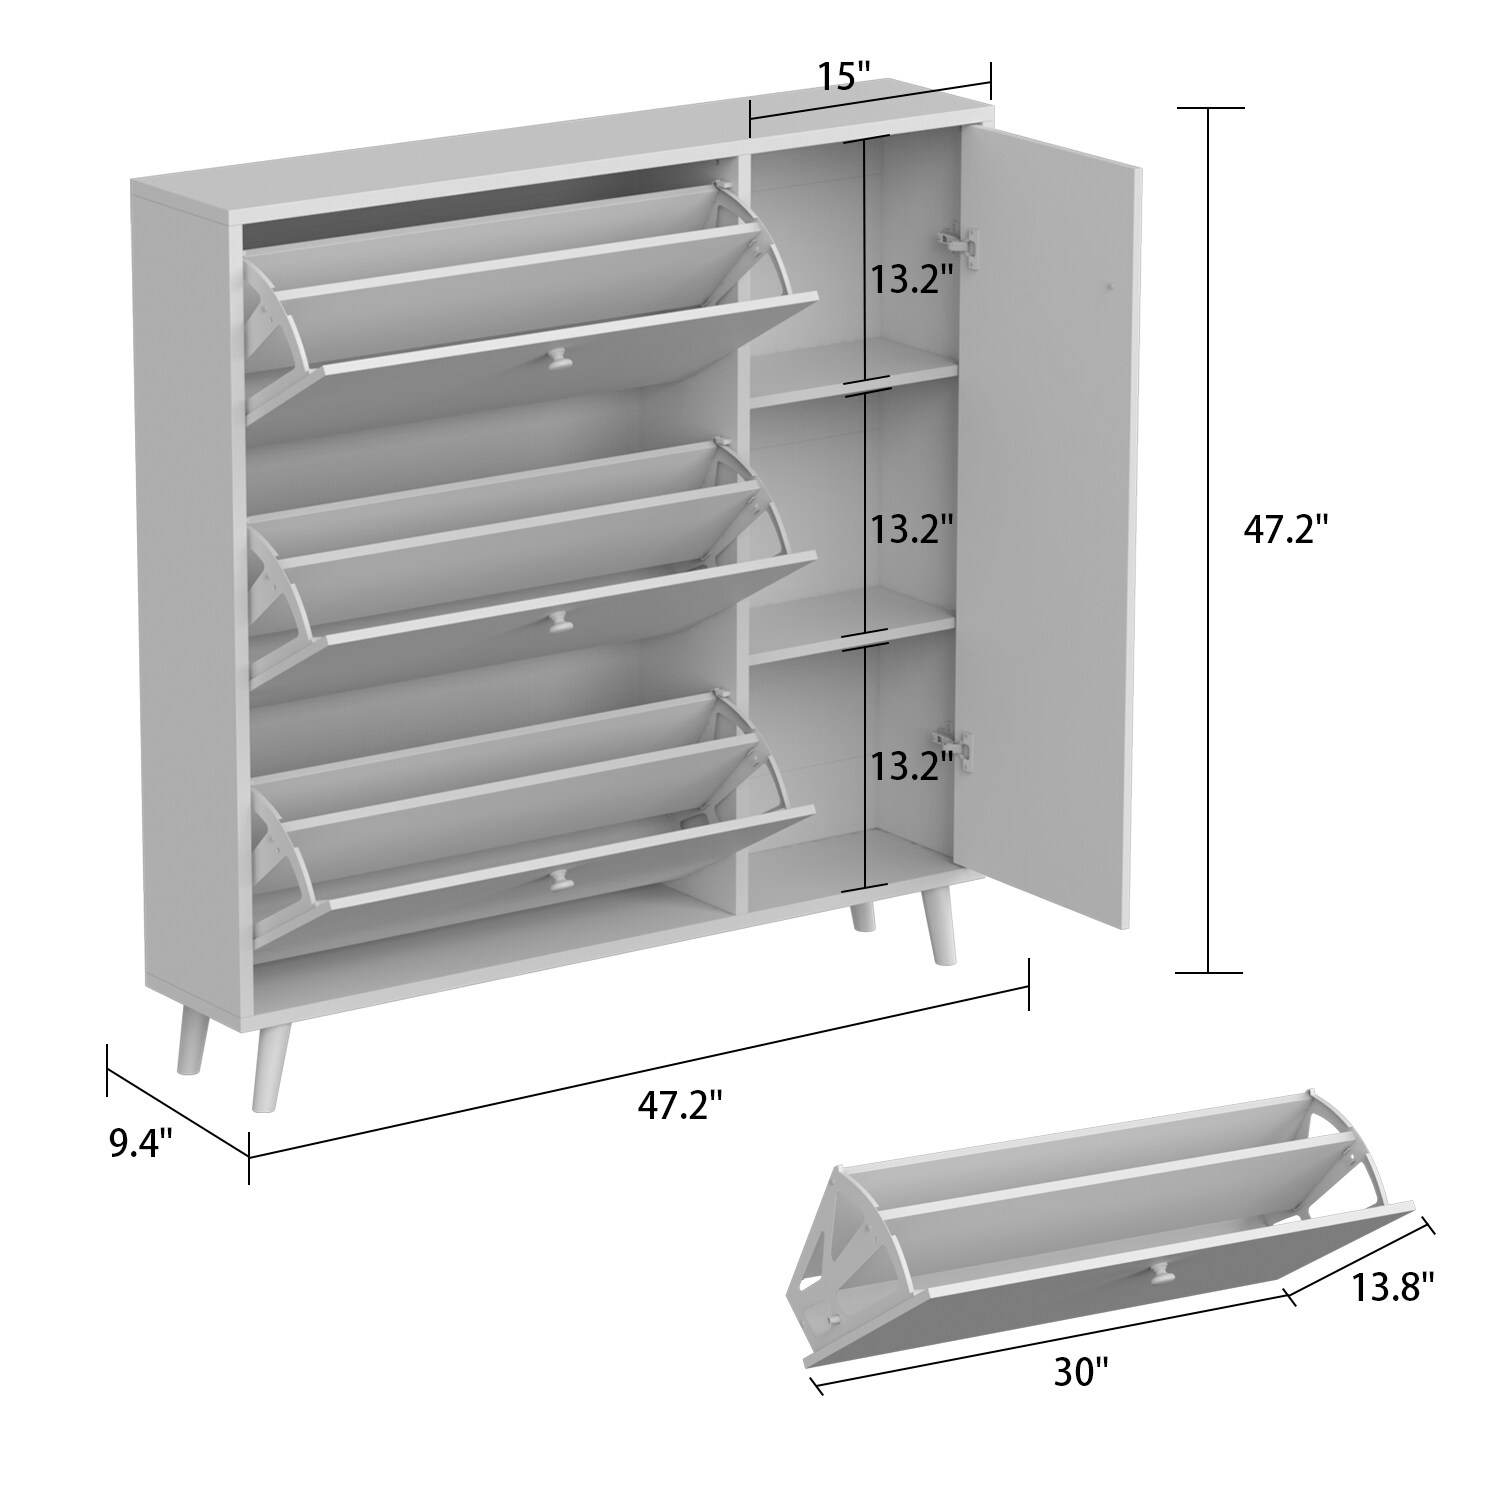 https://ak1.ostkcdn.com/images/products/is/images/direct/75eb0c7172d822b9ff345cb41f81cf592e505e25/47.2%22H-Shoe-Cabinet-Shoe-Rack-Flip-Down-Entryway-Storage.jpg